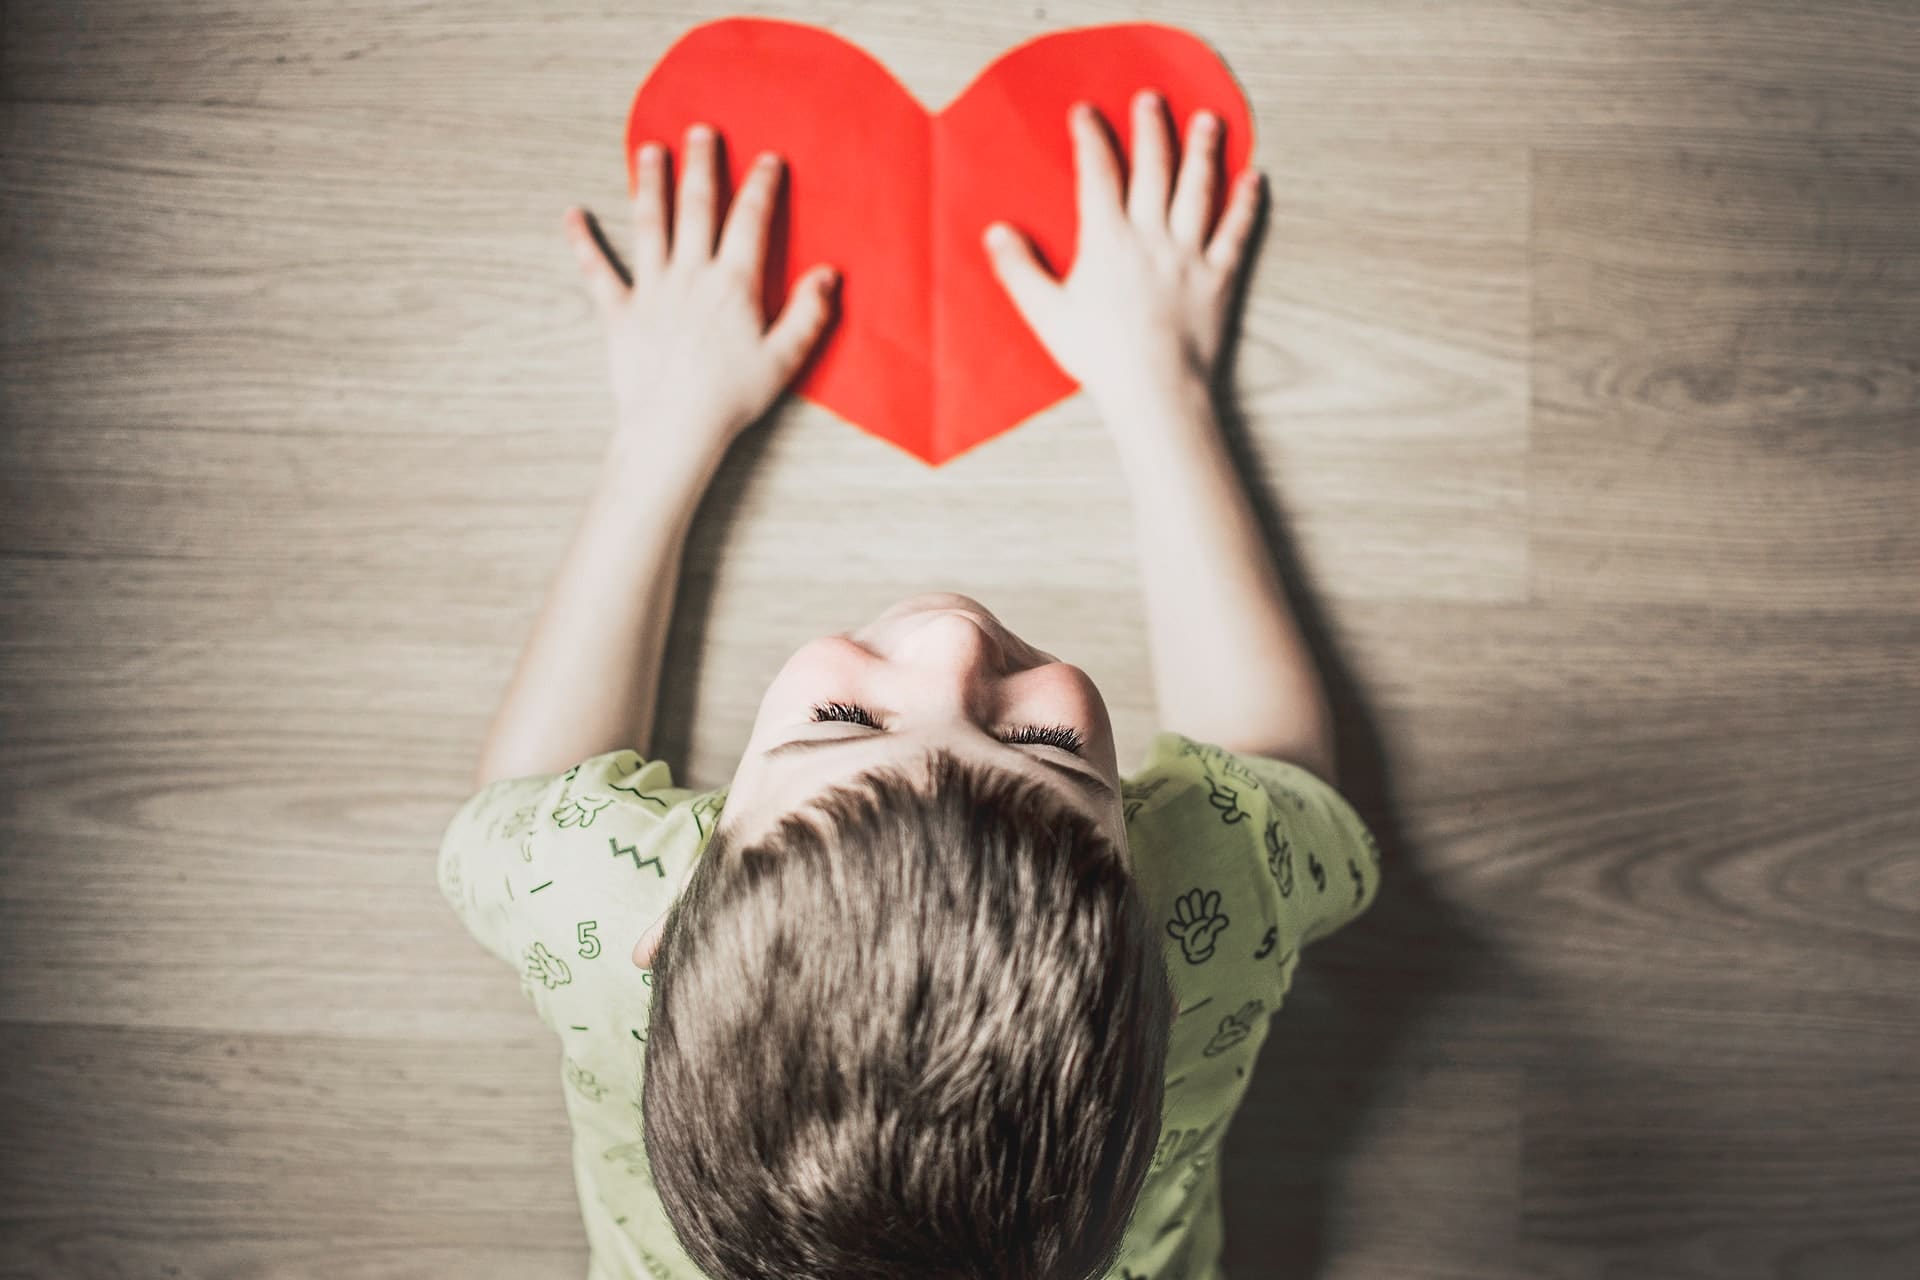 boy holding the heart shaped red paper lying on the floor